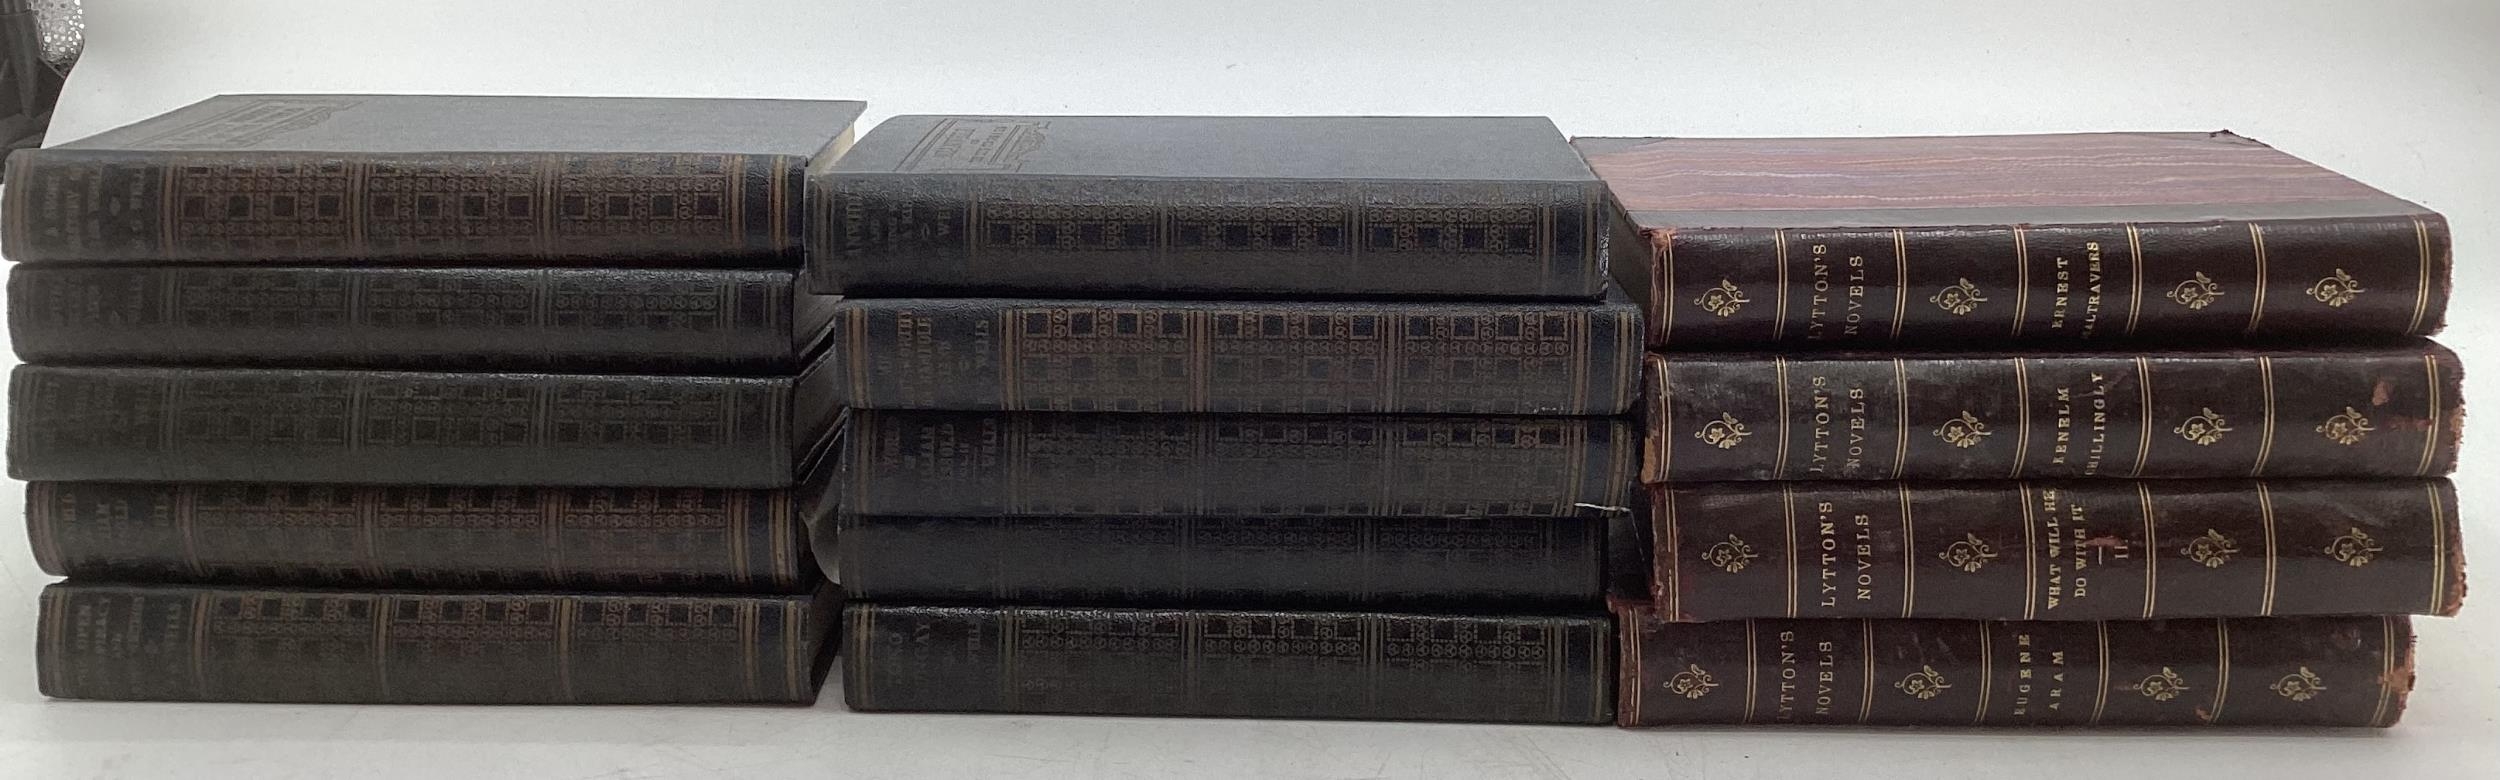 The works of HG Wells in 10 volumes and 4 volumes of Lytton's novels.